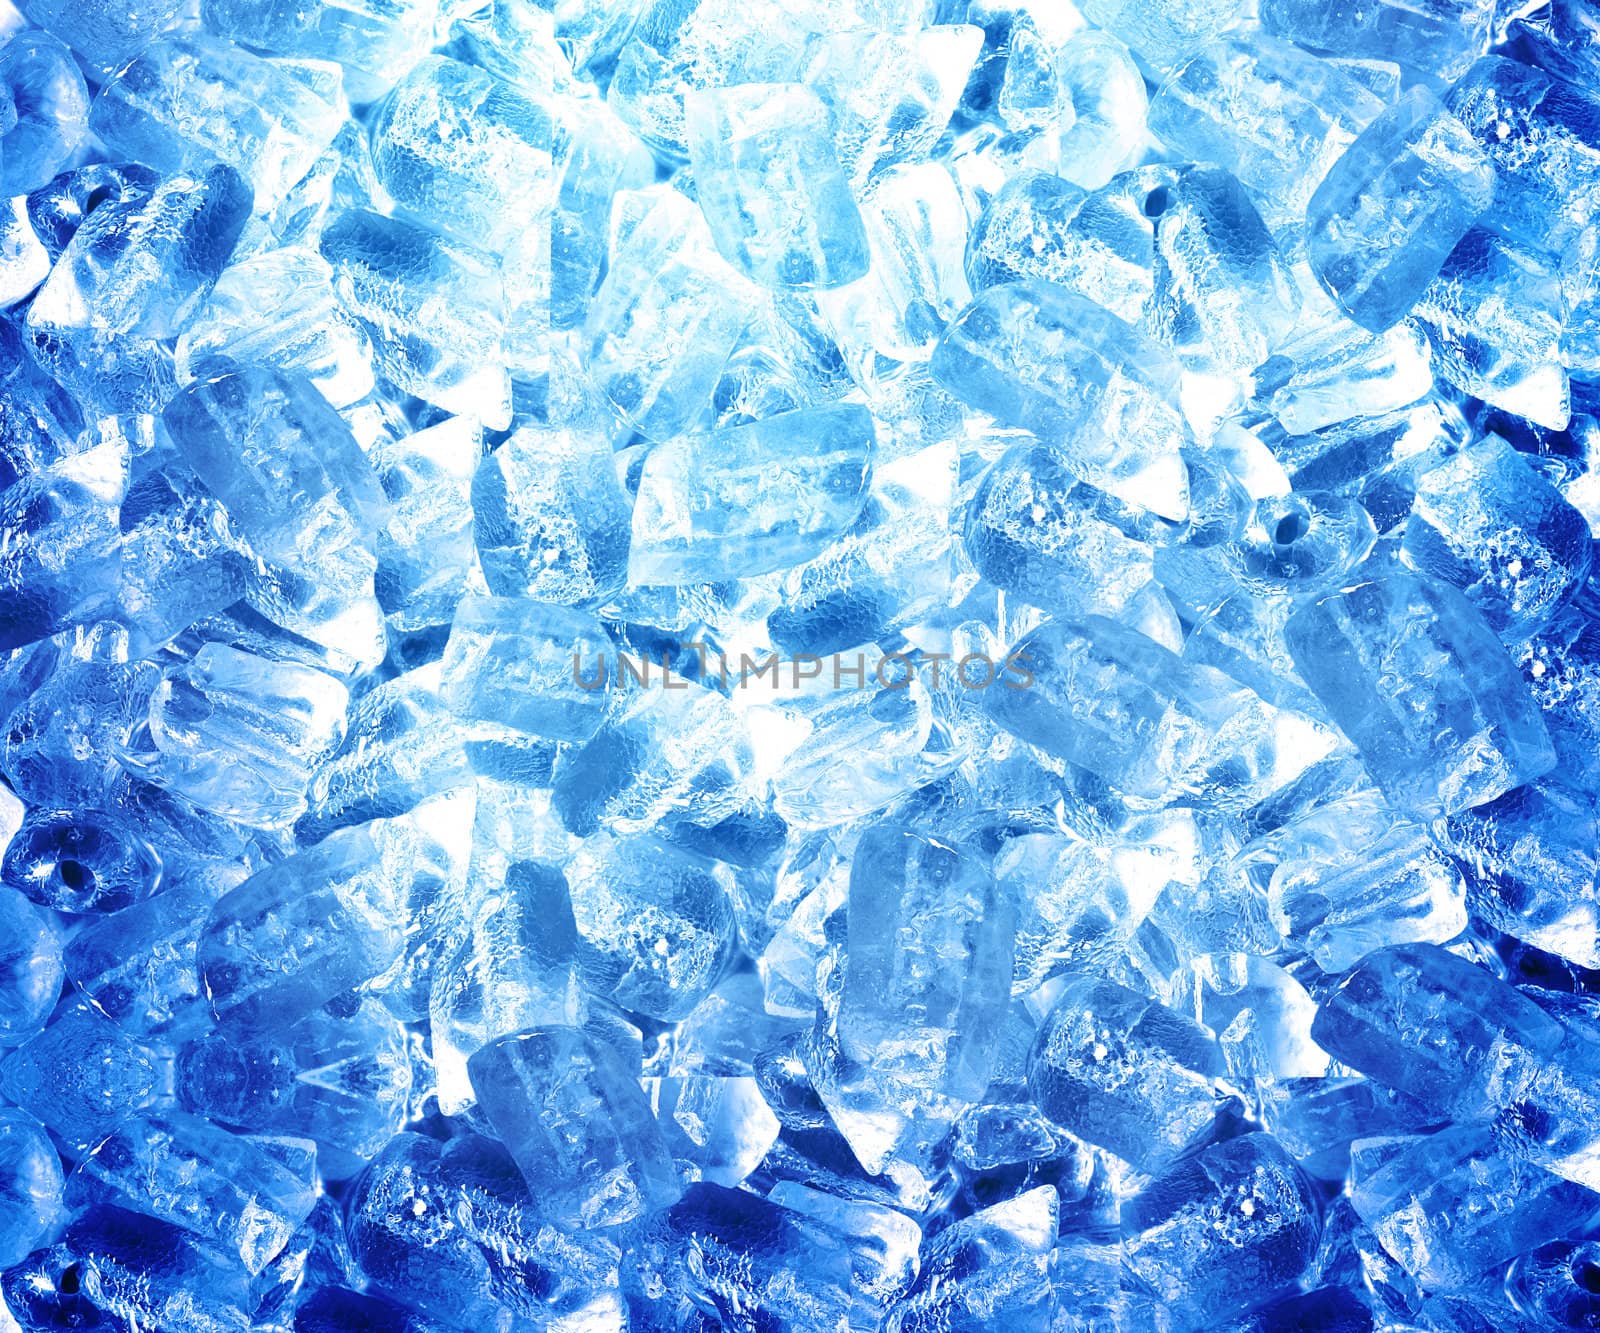 Background of blue ice cubes by sommai